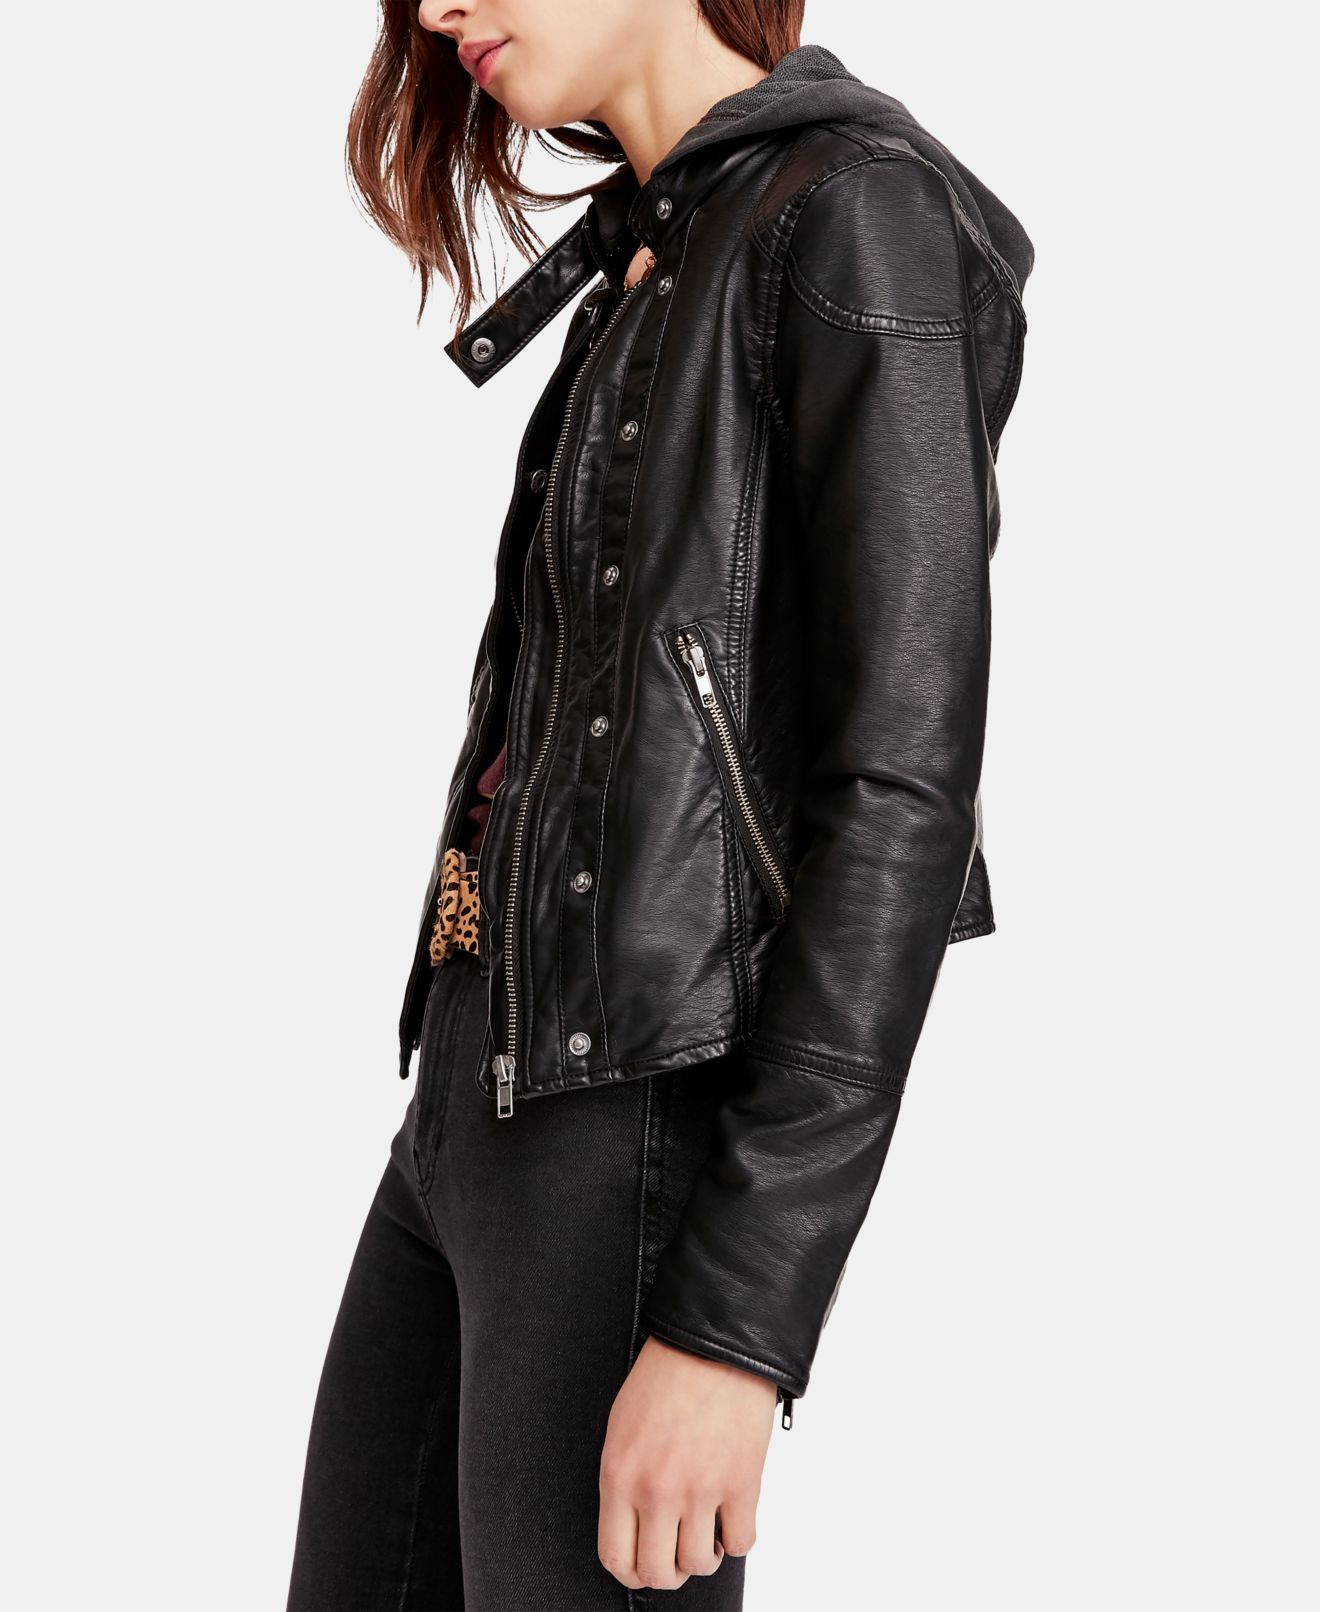 Color: Blacks Size Type: Regular Size (Women's): L Type: Jacket Style: Motorcycle Jacket Outer Shell Material: Rayon